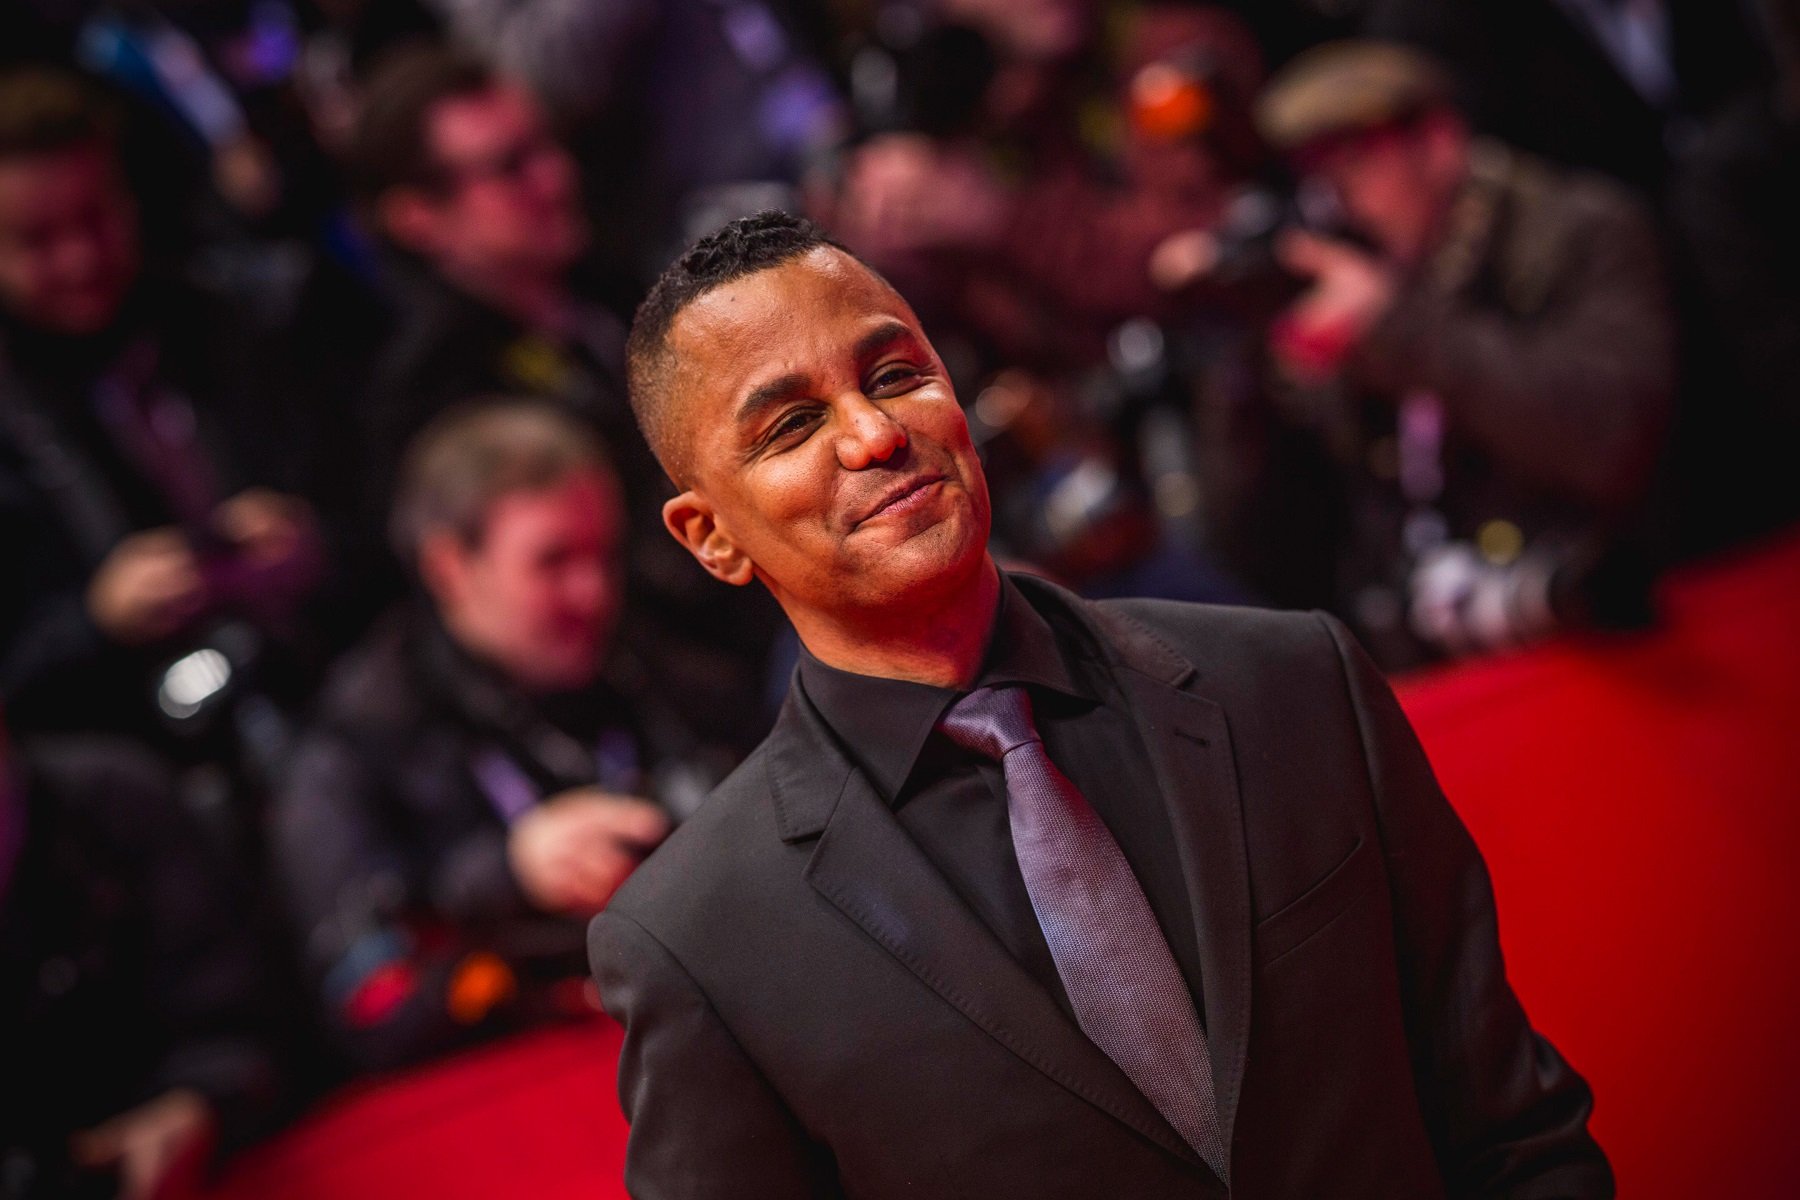 Yanic Truesdale arrives for the opening ceremony and "My Salinger Year" premiere during the 70th Berlinale International Film Festival Berlin